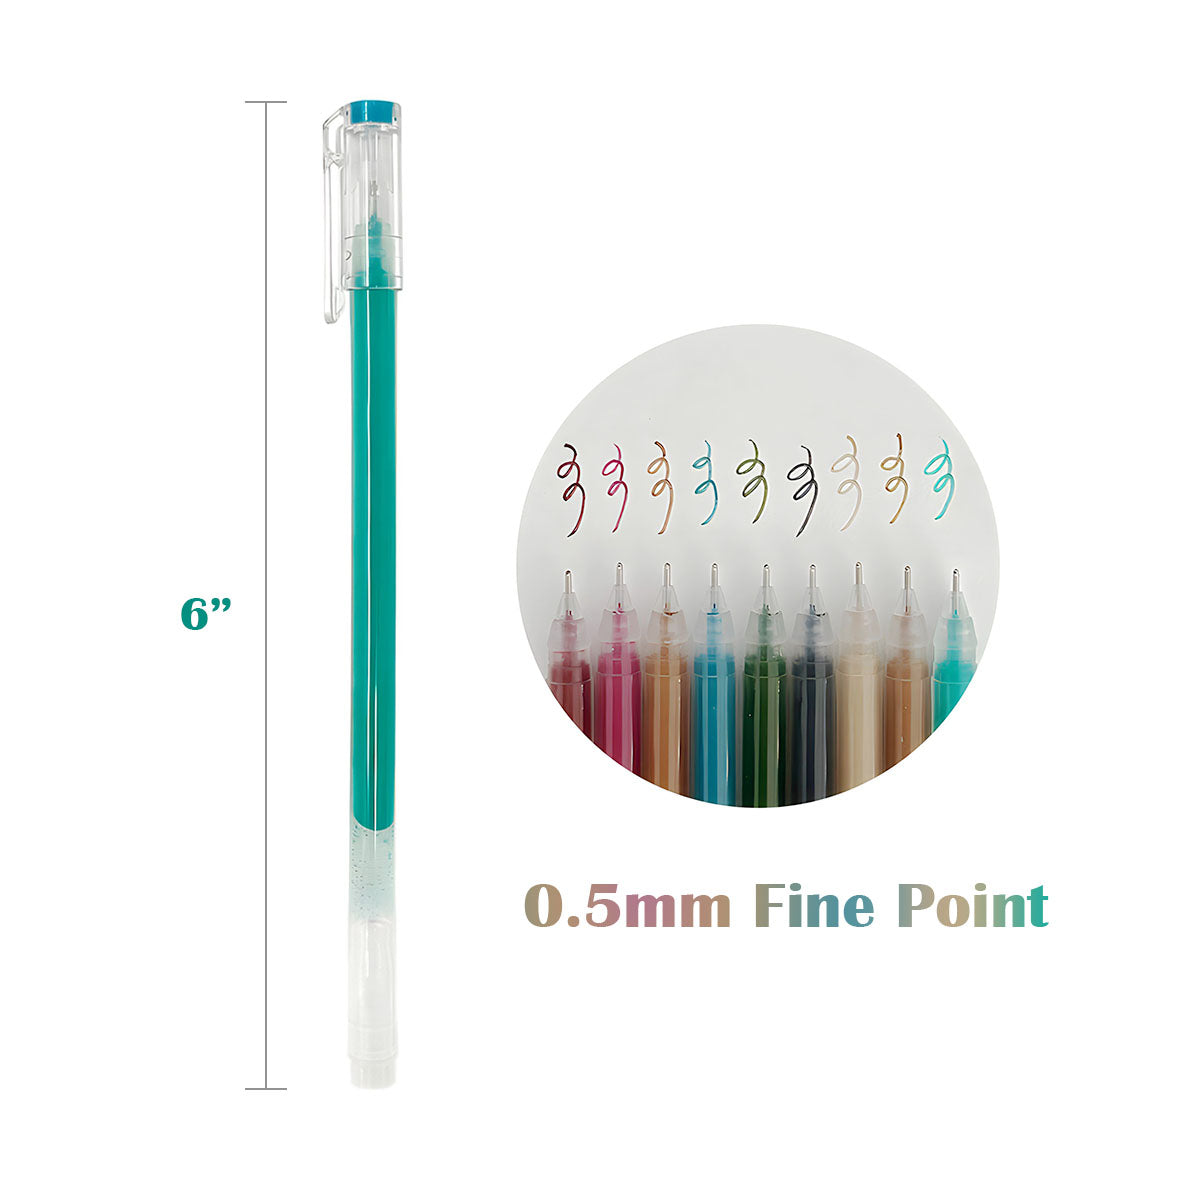  Cooapen Cute Colored Pens Galaxy Colorful Pens 0.5 mm Fine  Point Color Gel Ink Pens for Bullet Journaling Writing Planner Note Taking  School Office Supplies, 10 Count : Office Products